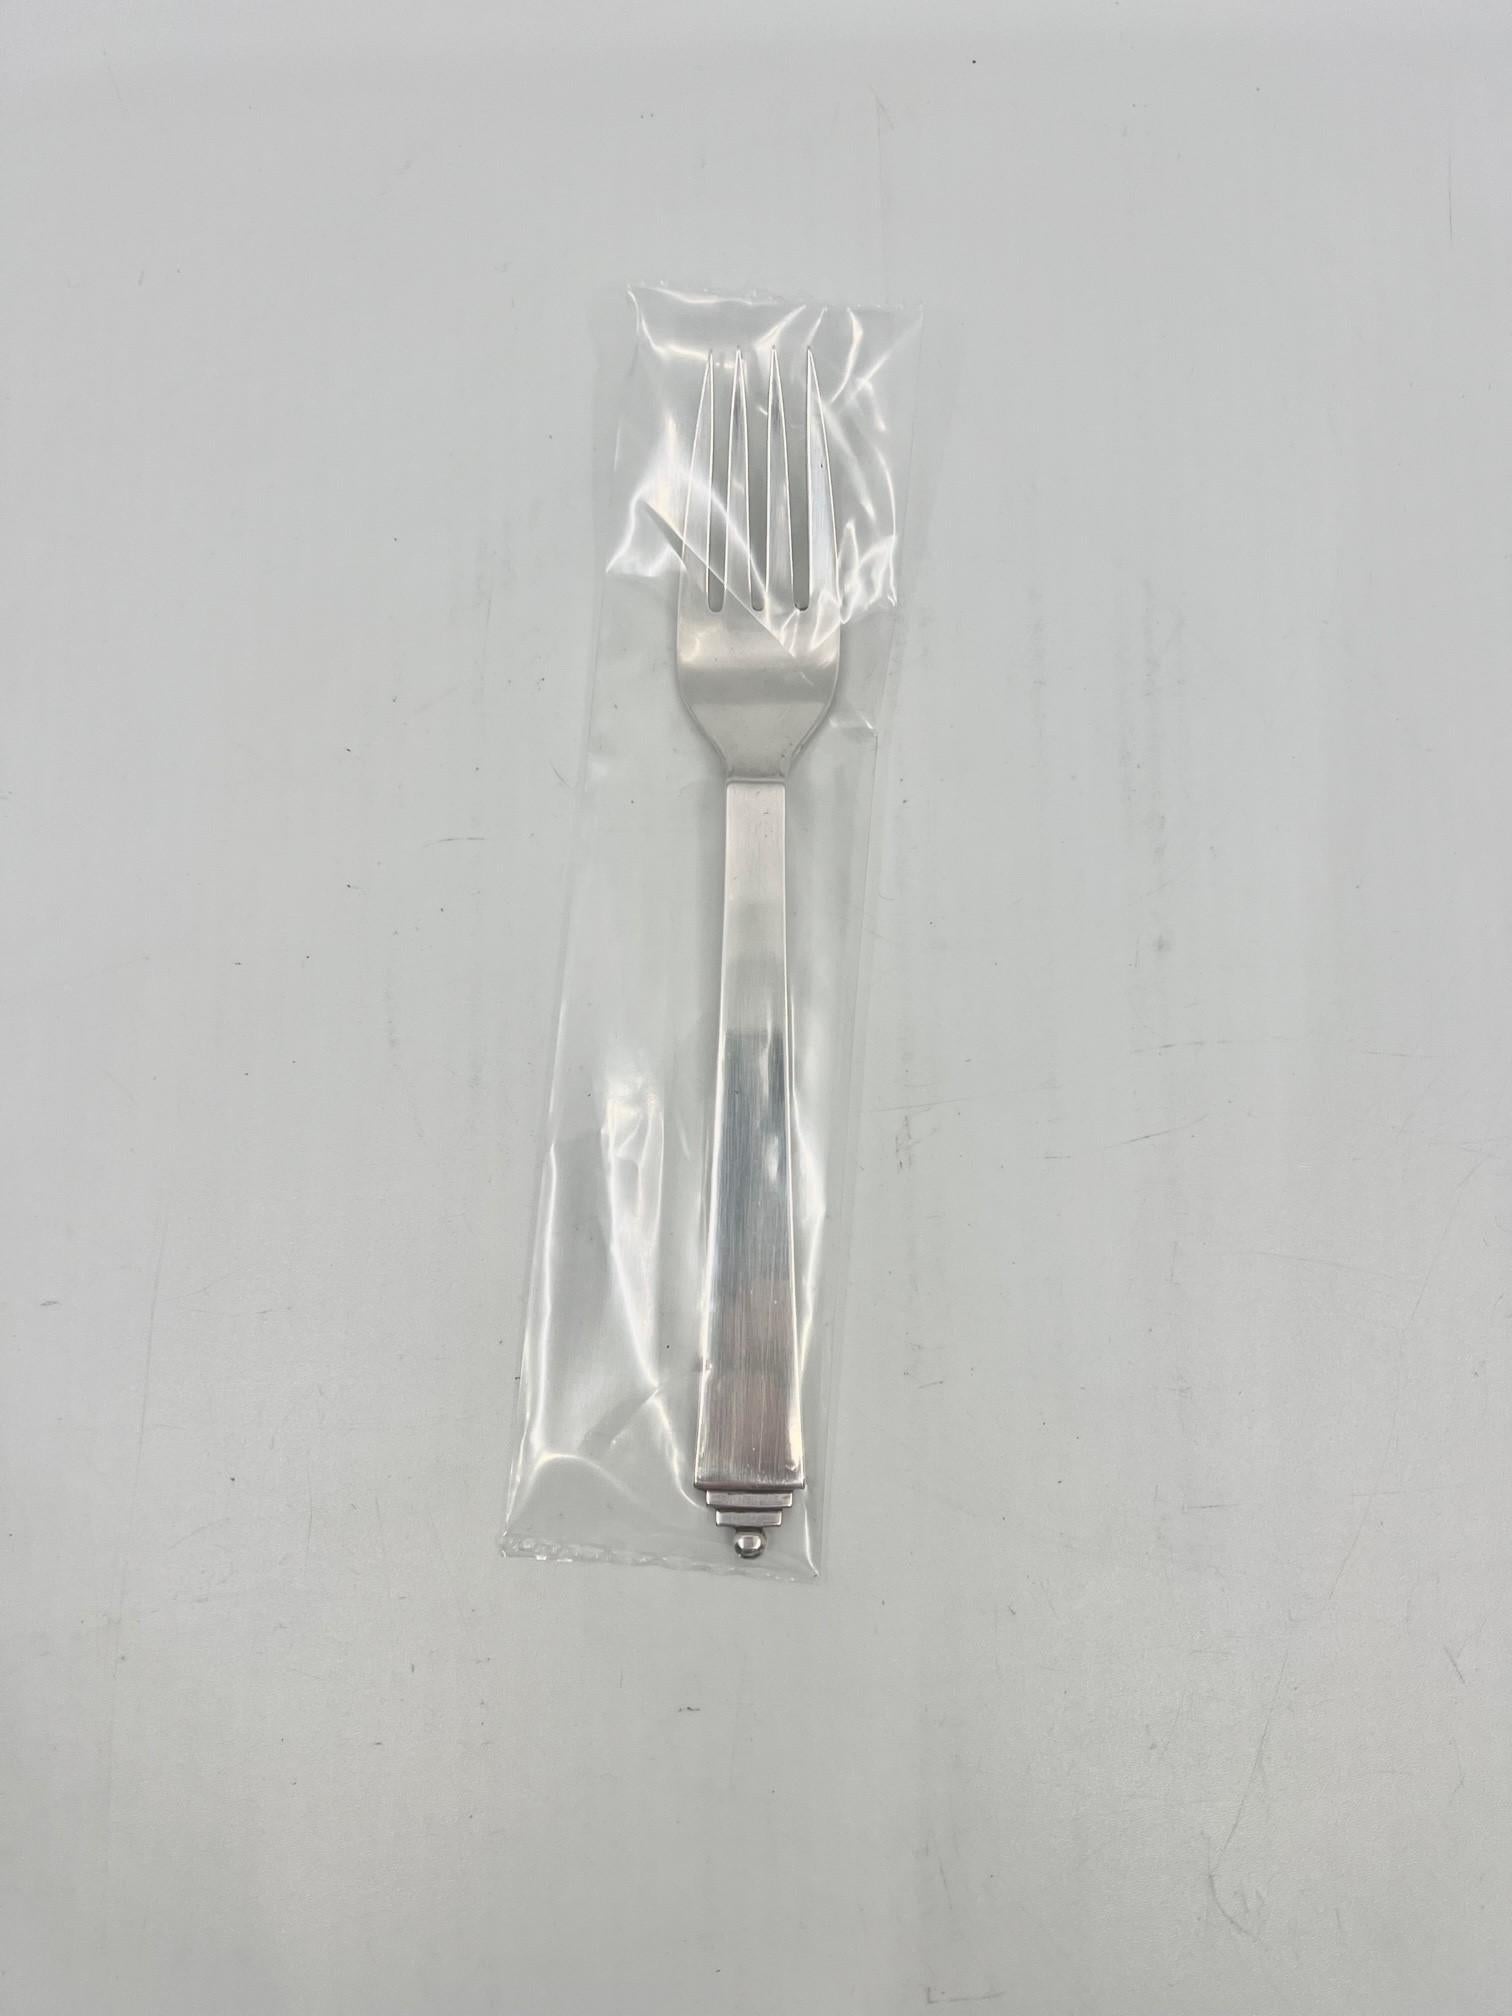 A sterling silver Georg Jensen luncheon/salad fork, item 022 on the Pyramid pattern, design #15 by Harald Nielsen from 1926.

Additional information:
Material: Sterling silver
Styles: Art Deco
Hallmarks: Georg Jensen hallmarks from